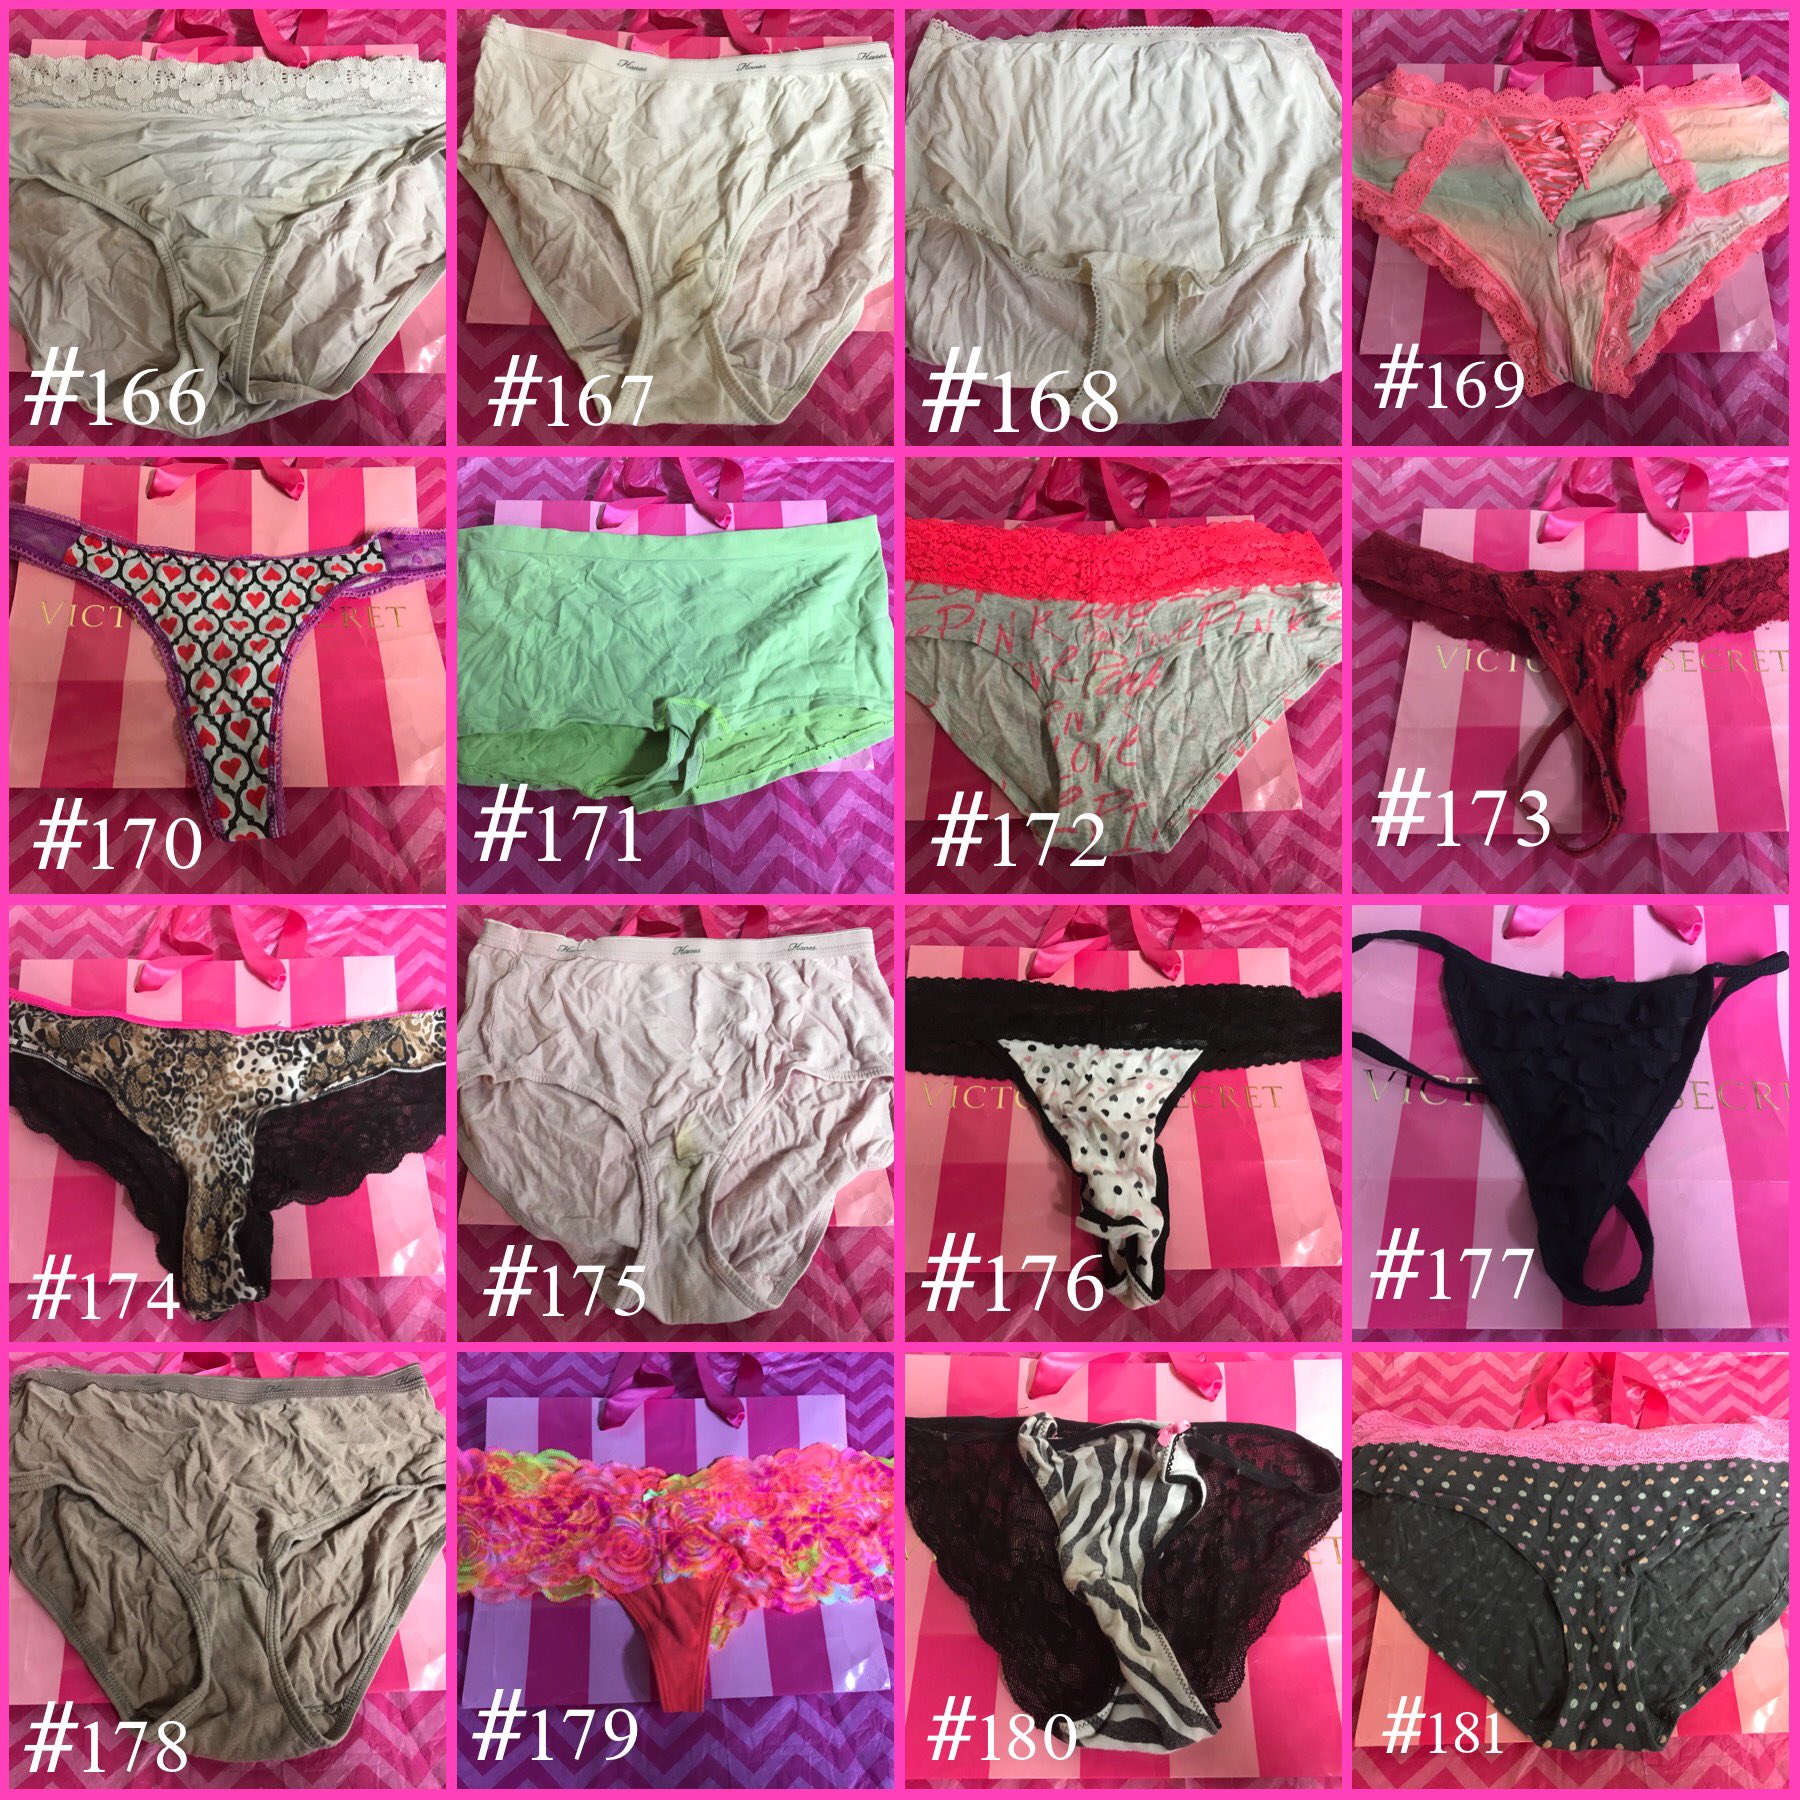 Erica's Used Panties👙🍊🍒🍭 on X: 🍭Erica's 💖end of summer sale